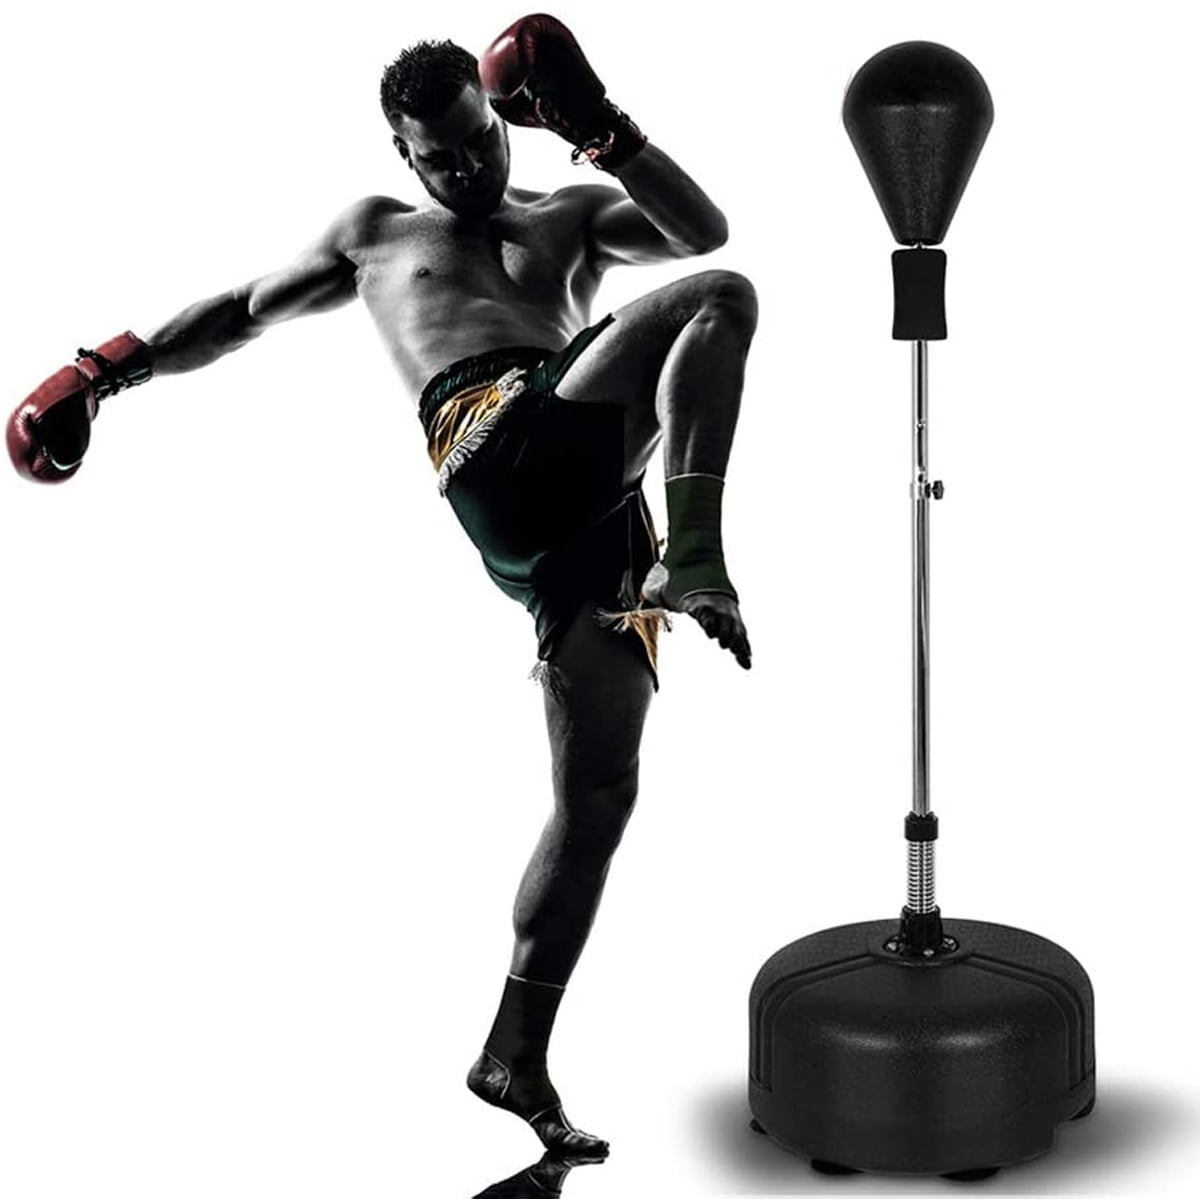 47-59inch Adjustable Adult Training Punching Bag Stand Boxing Glove Home Gym Set 